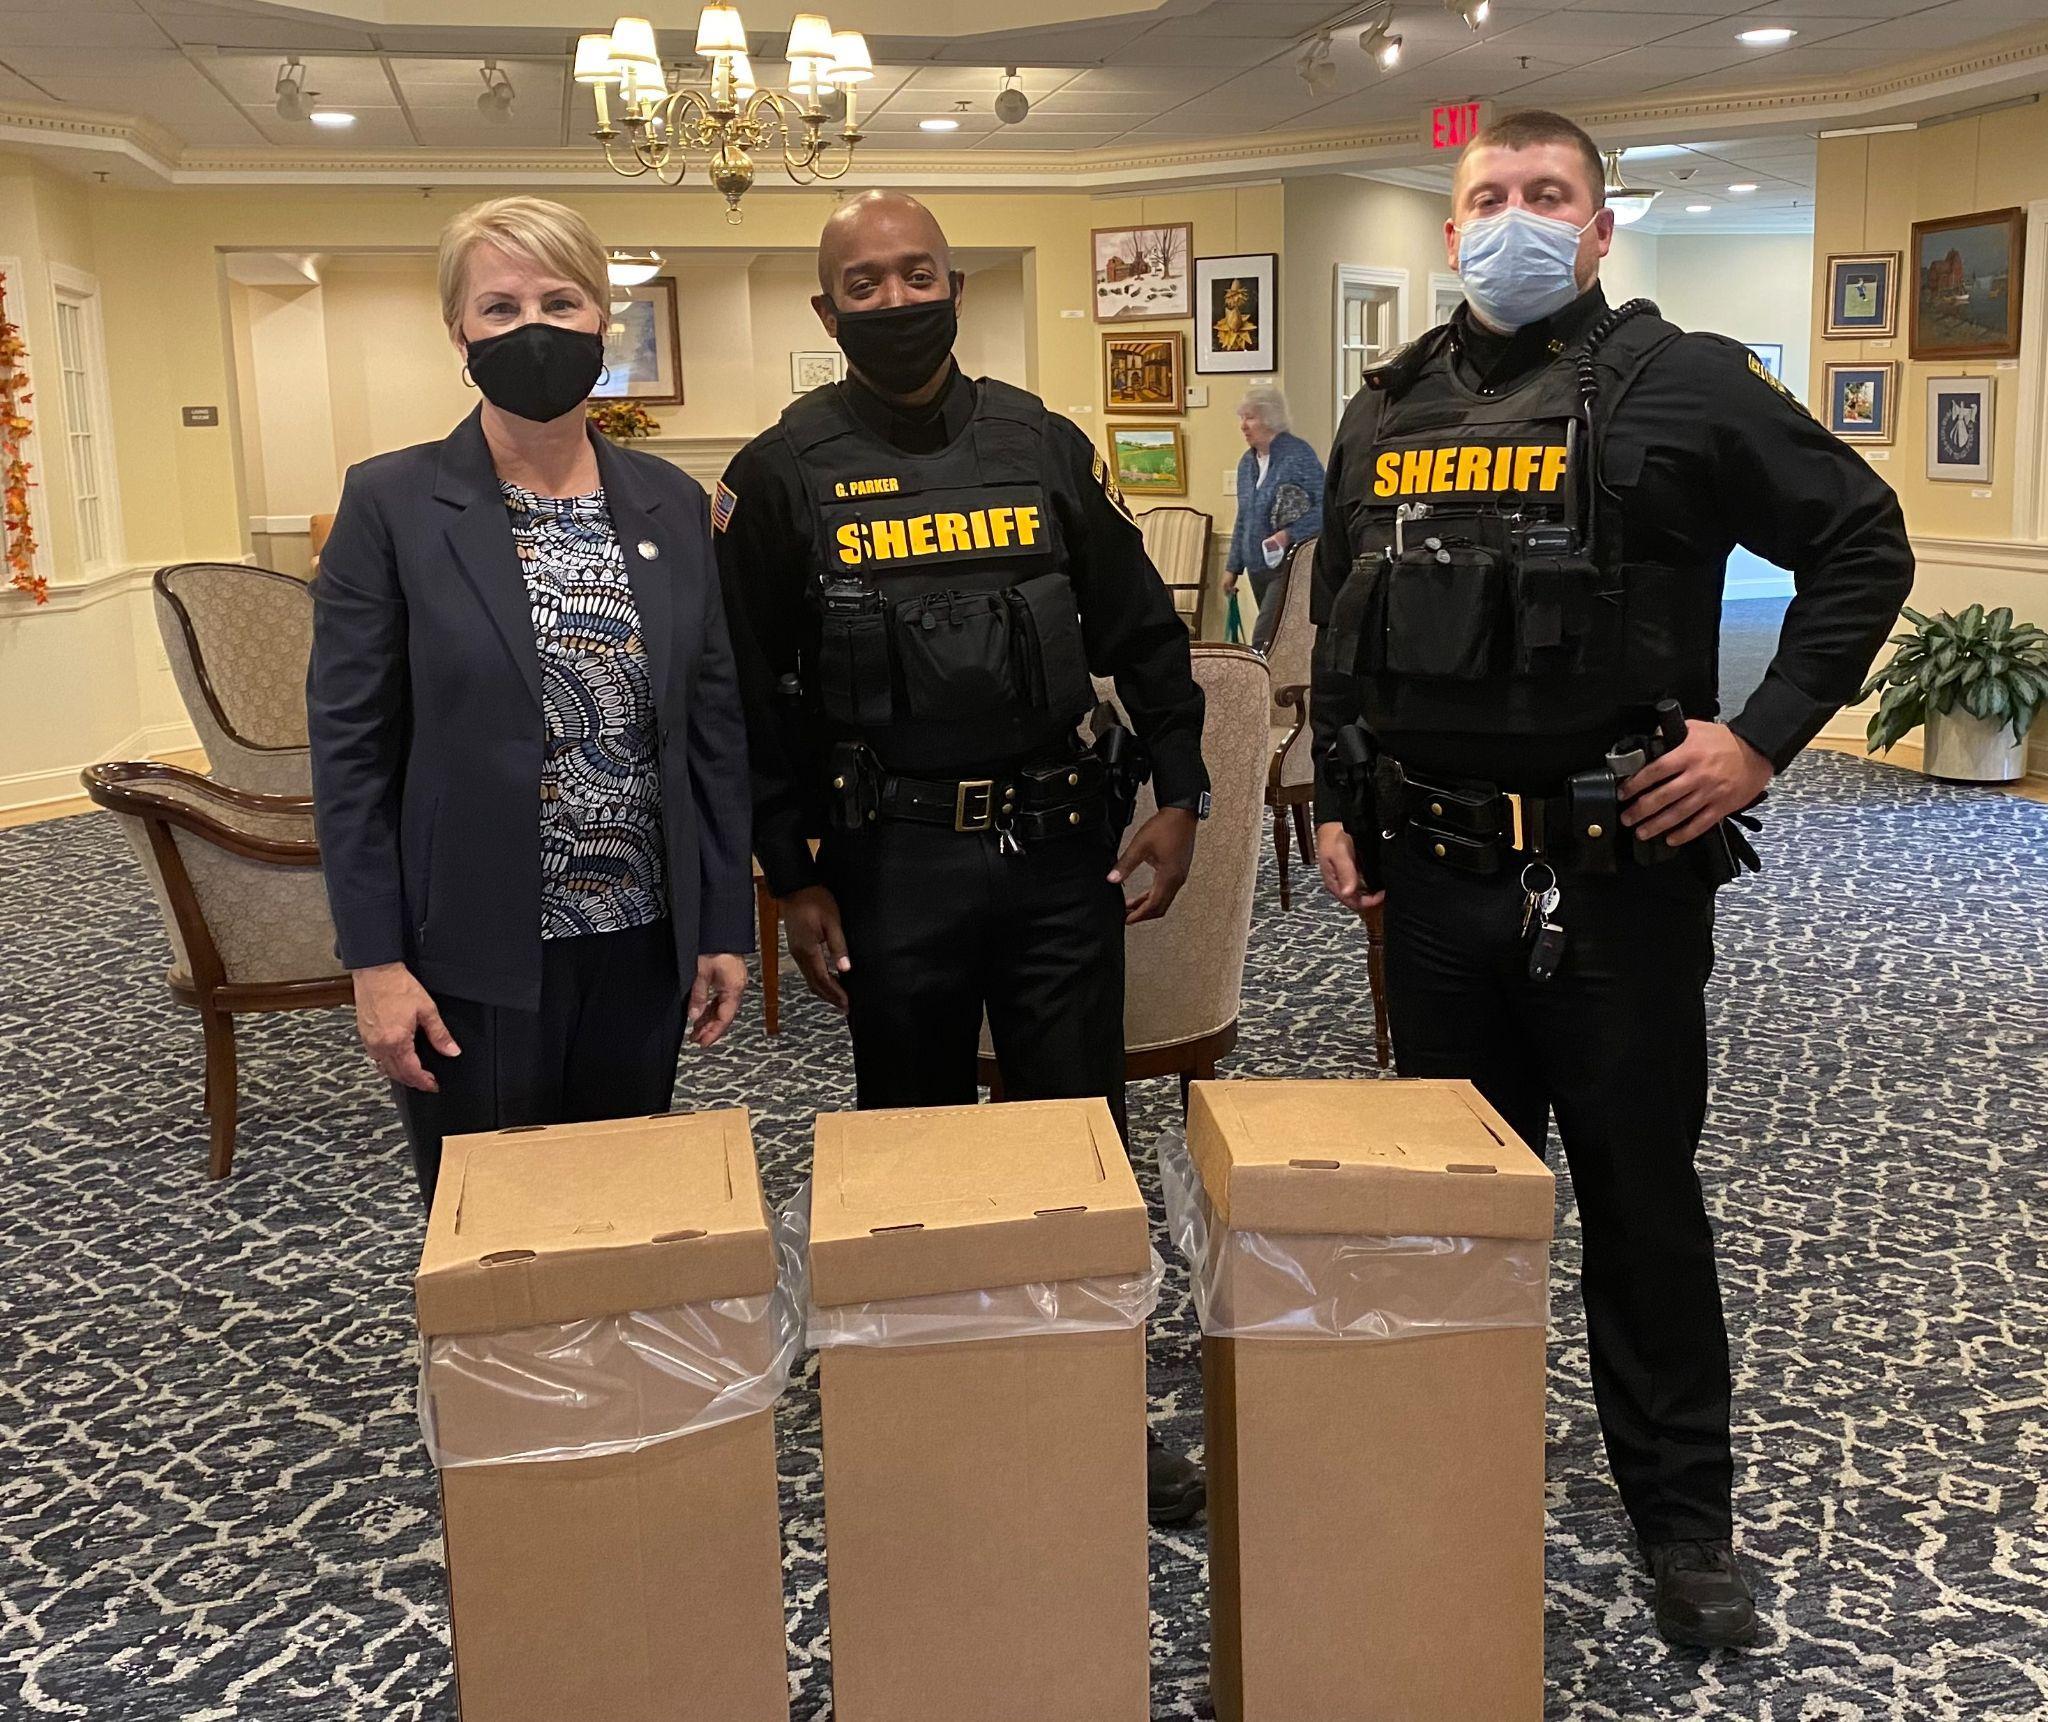 Assemblywoman Mary Beth Walsh (R,C-Ballston) pictured with members of the Saratoga County Sheriff’s Department at this morning’s Drug Take-Back Event.